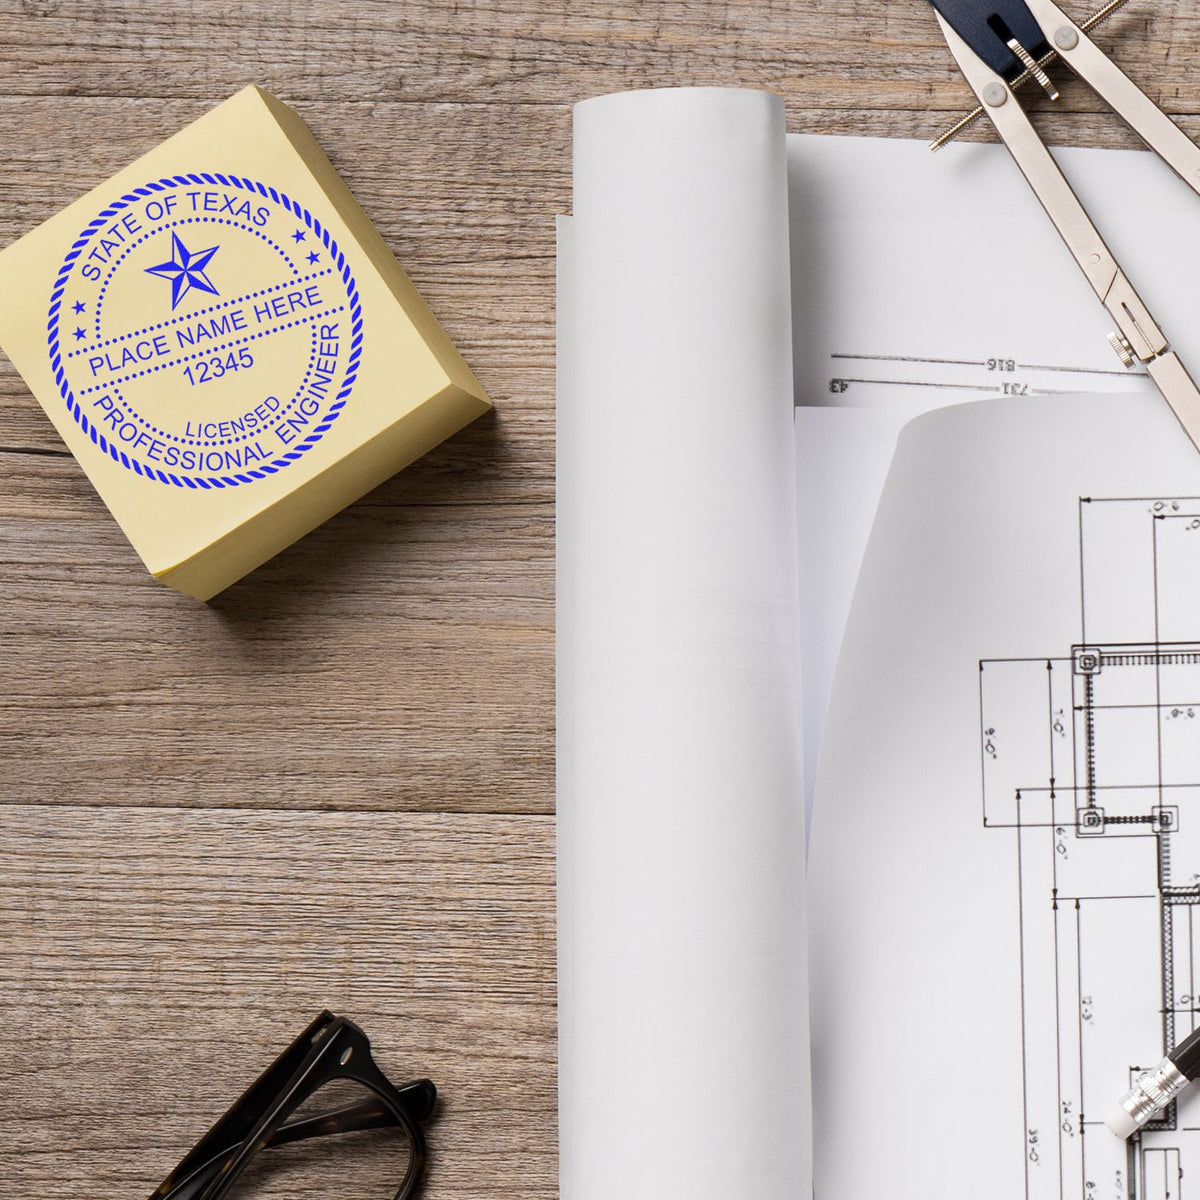 The Texas Professional Engineer Seal Stamp stamp impression comes to life with a crisp, detailed photo on paper - showcasing true professional quality.